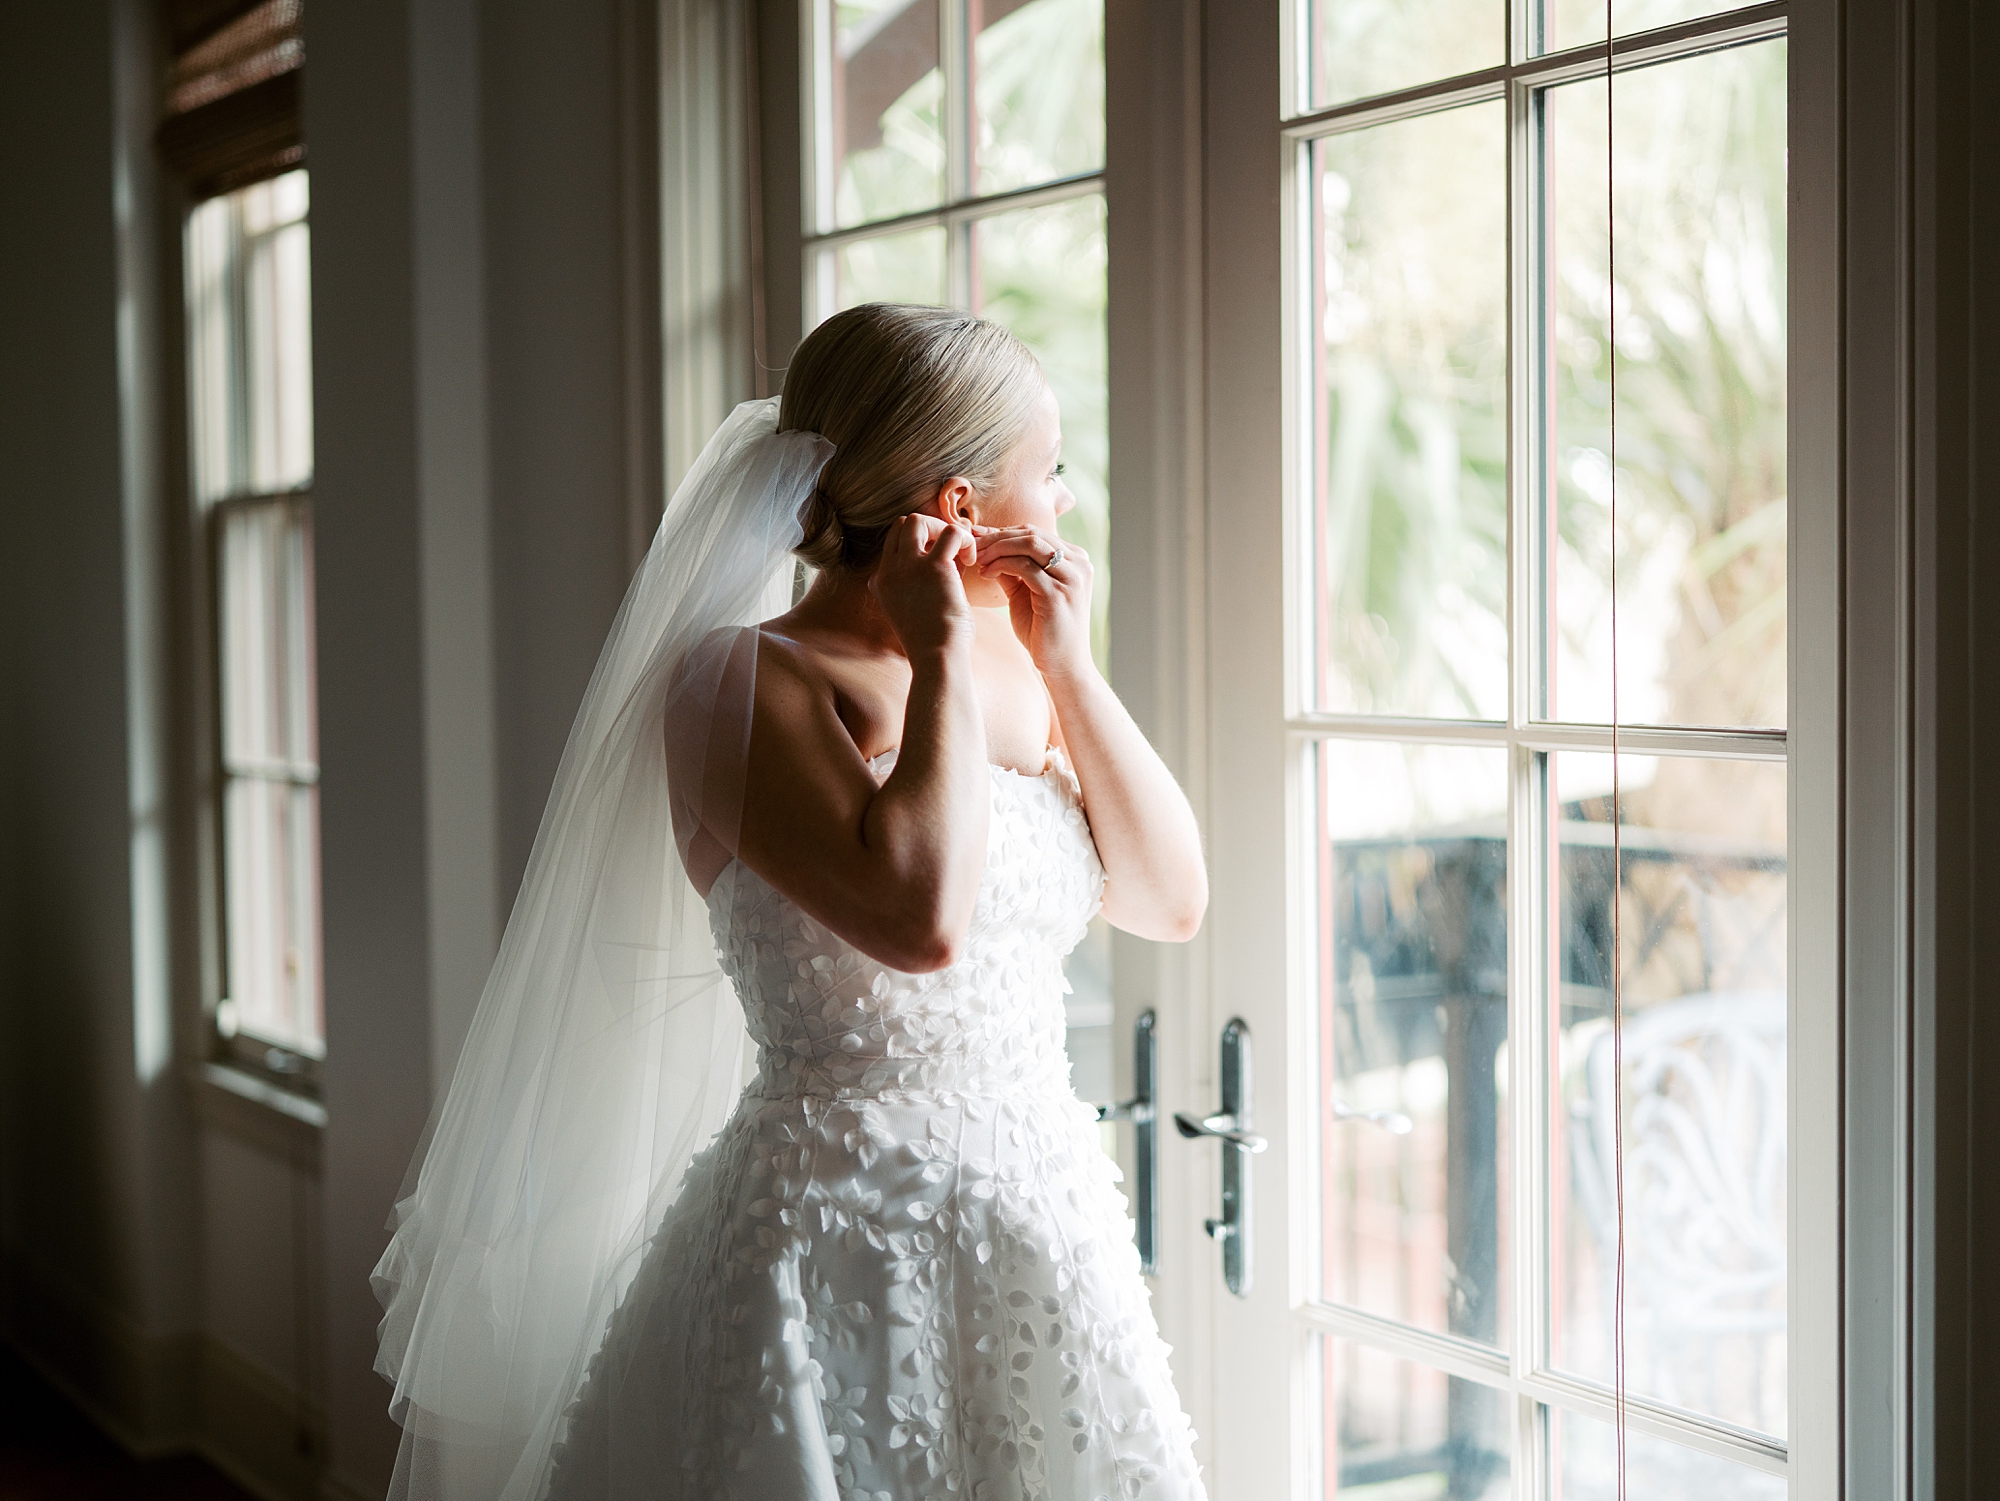 bride puts on earrings in window of home wearing Anne Barge wedding dress with textured bodice and skirt